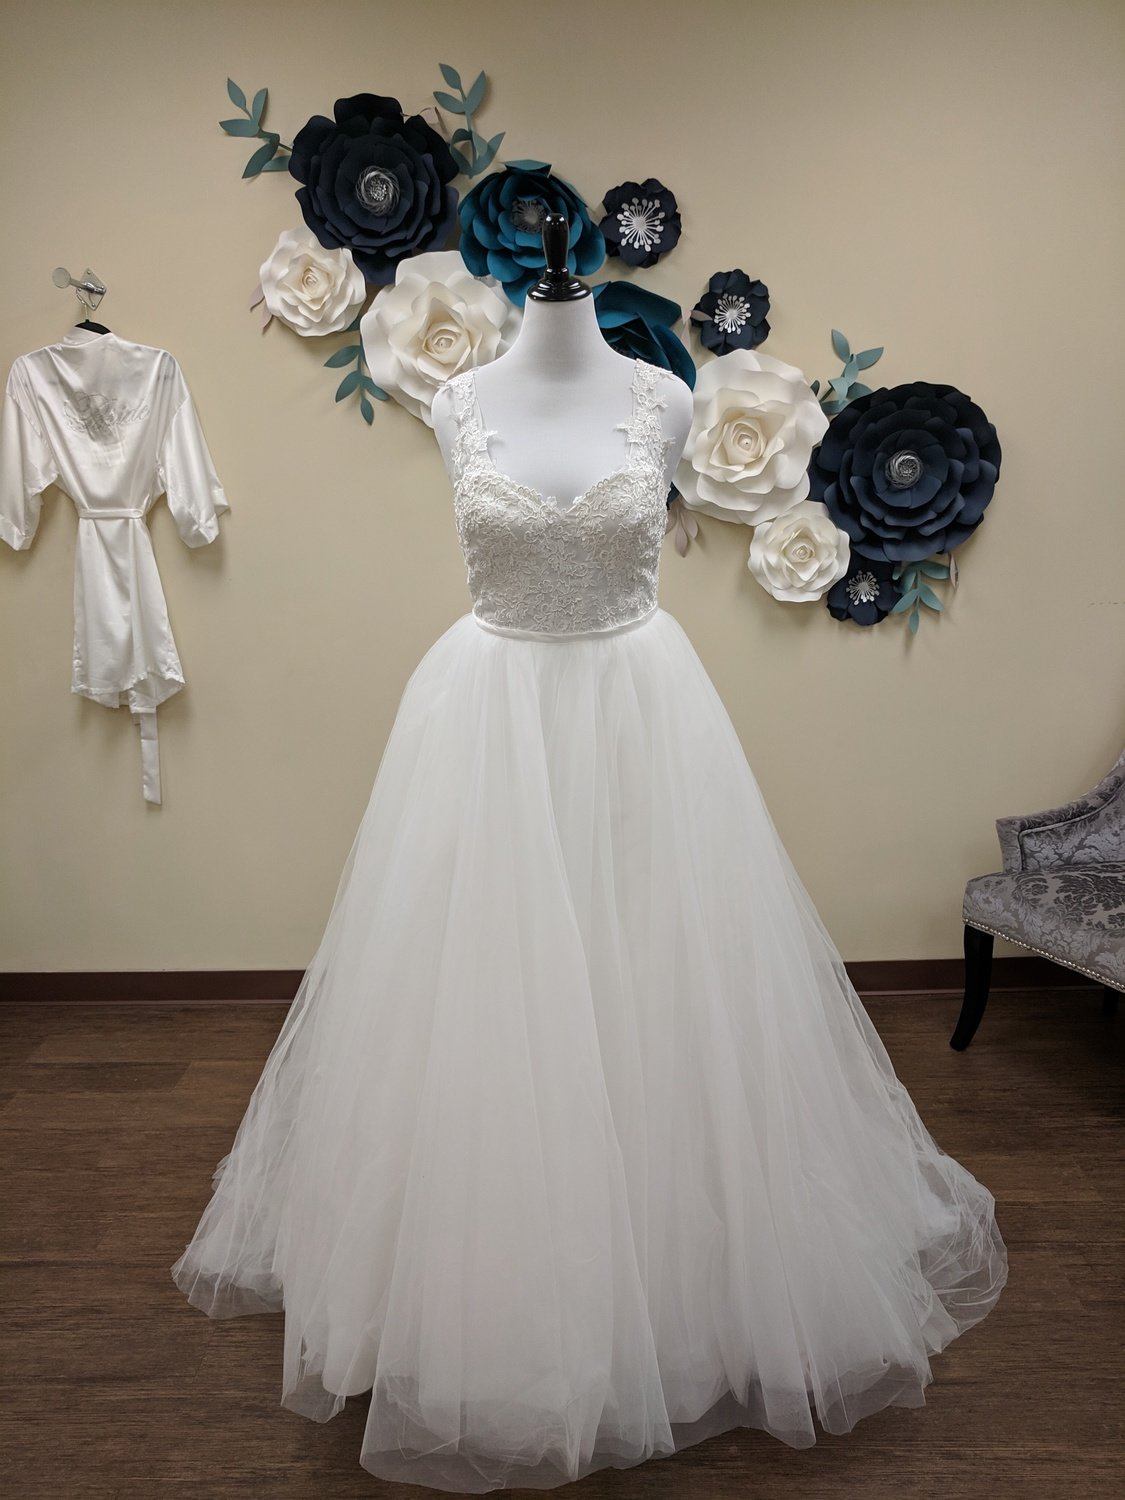 2 in 1 Gown with Lace Detail and Tulle Skirt - Sample Size 14